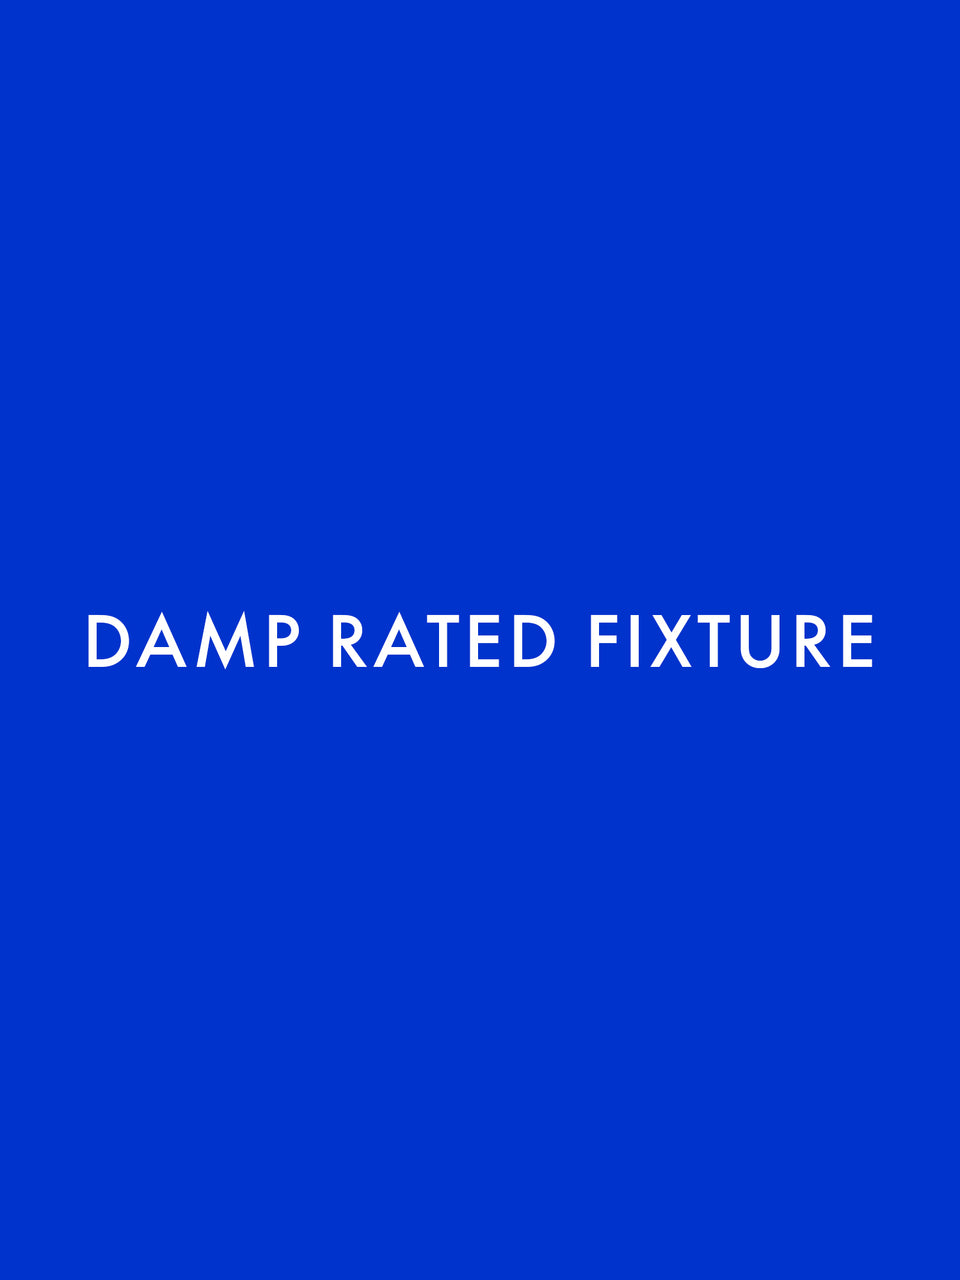 Damp Rated Fixture